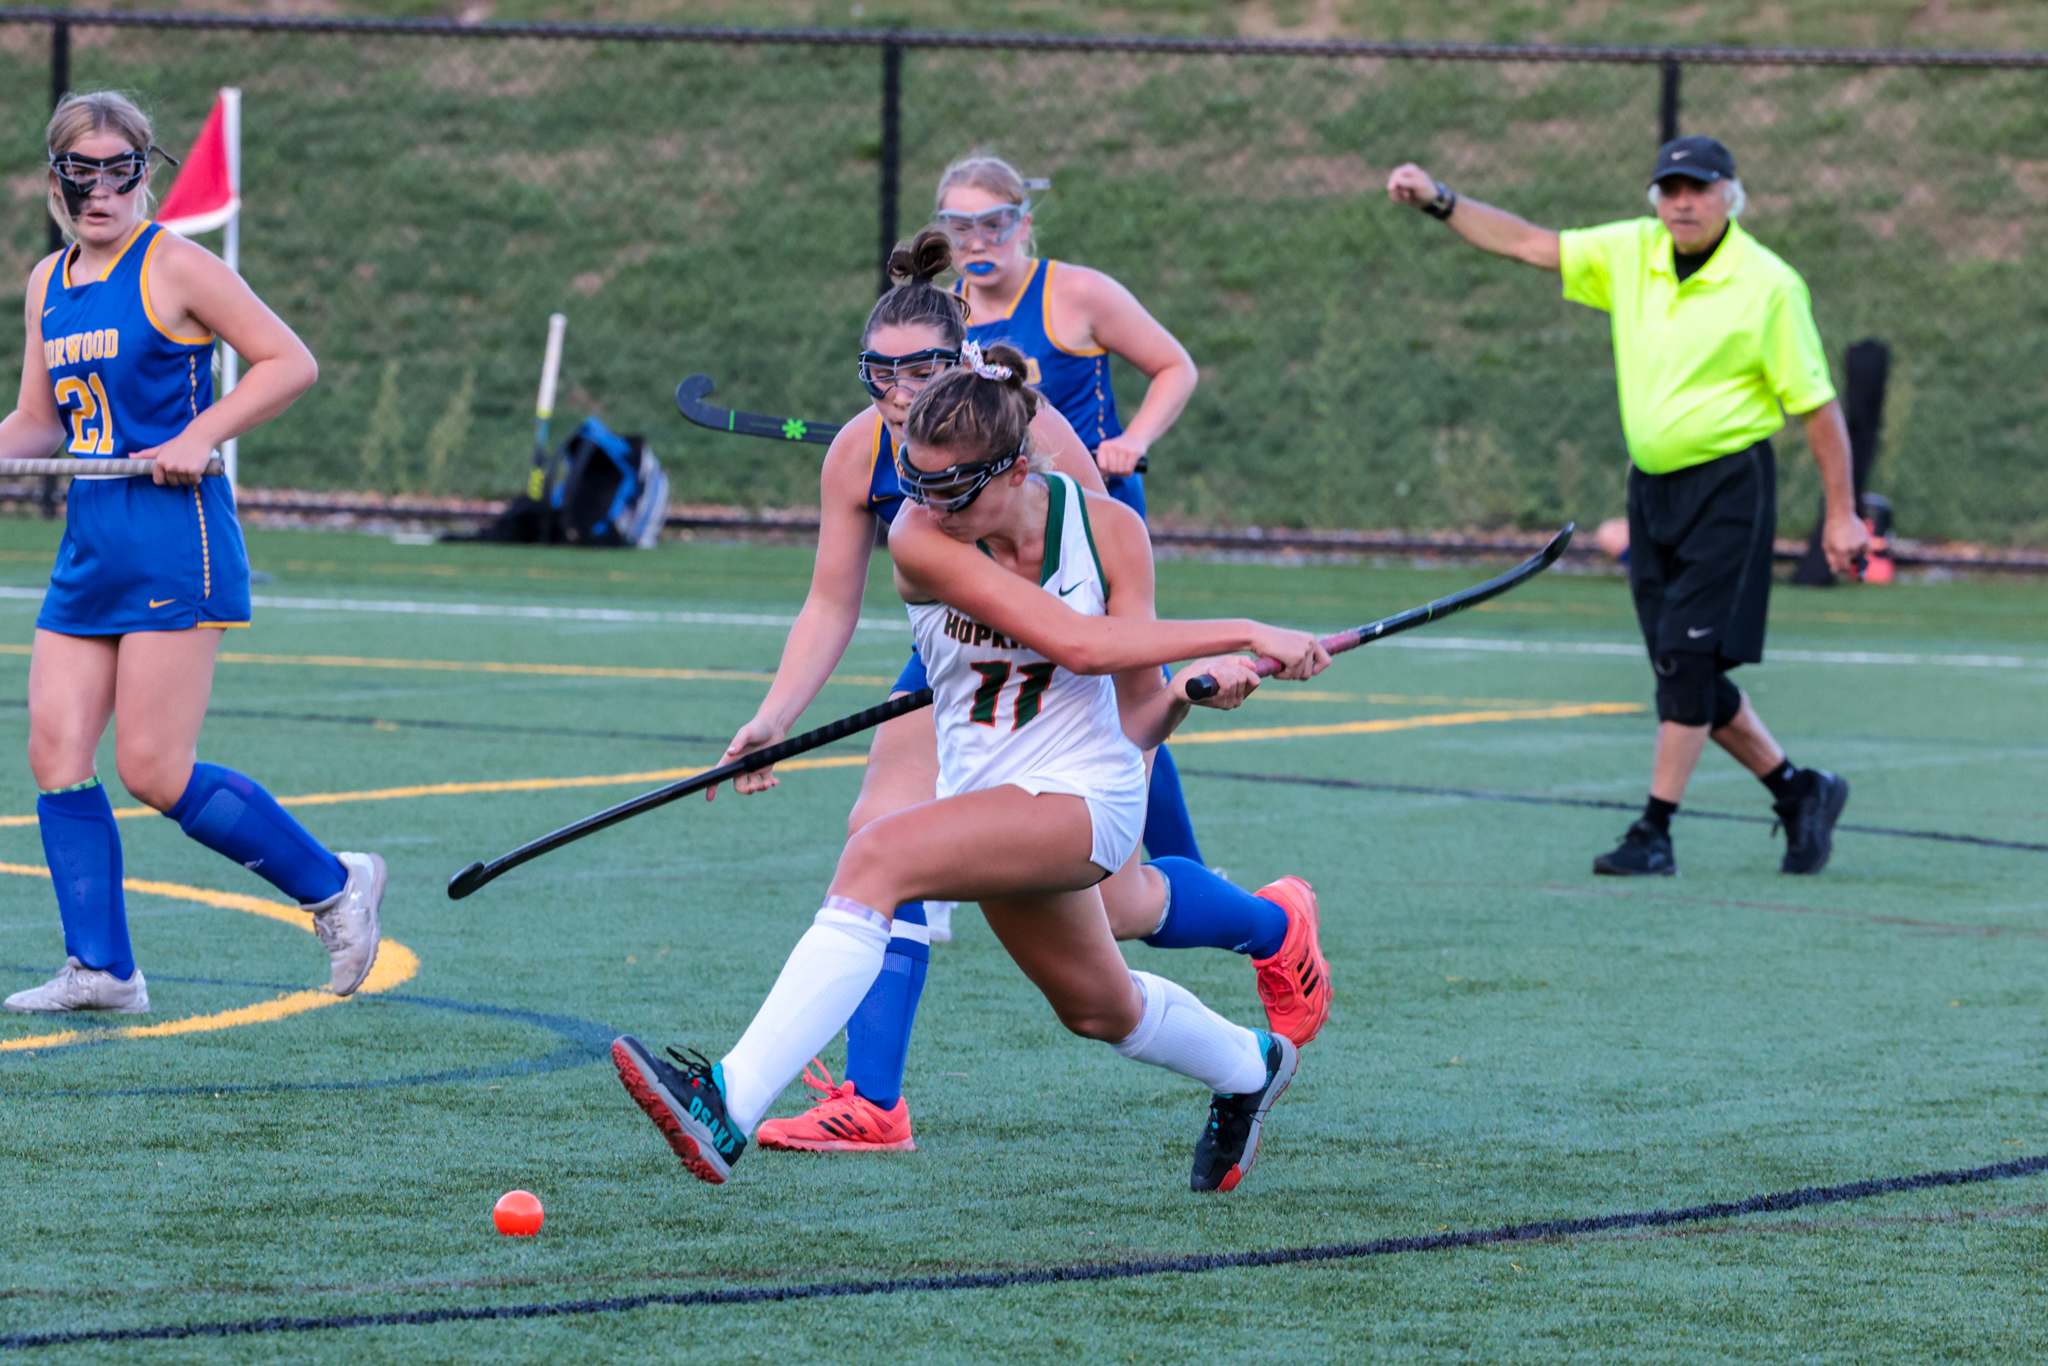 Refocused HHS field hockey takes it day by day